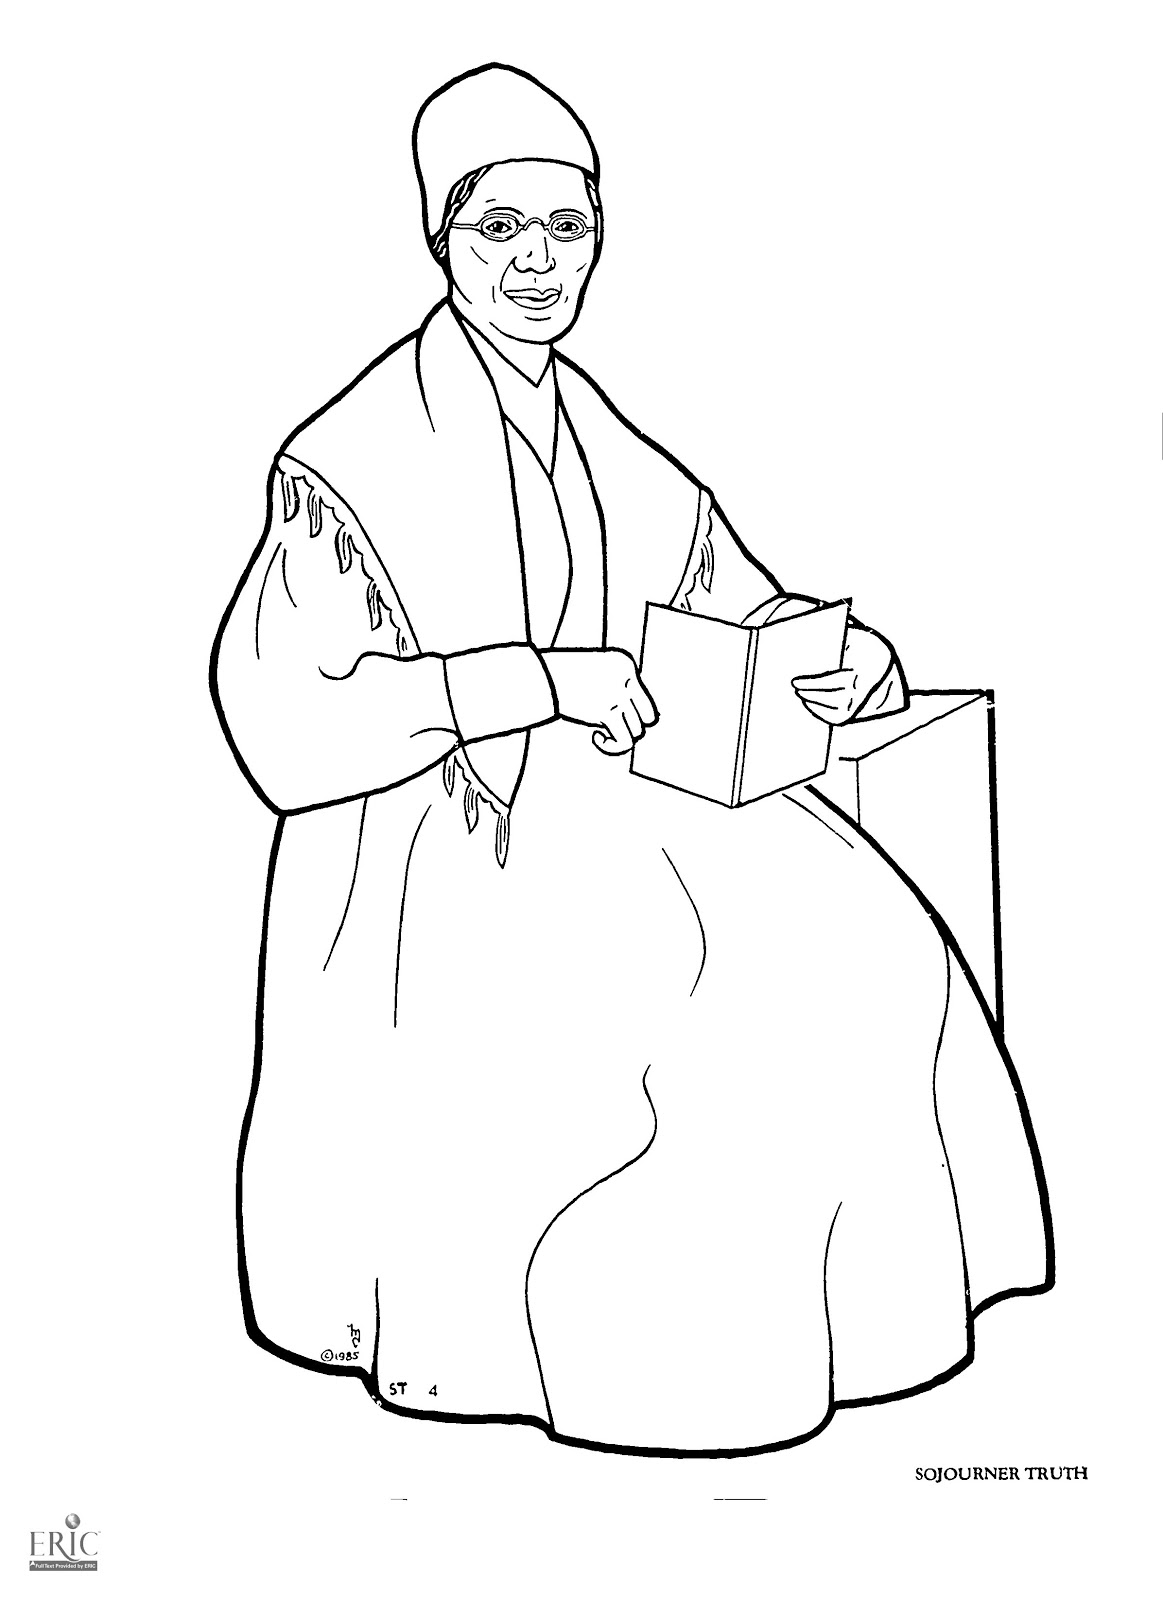 Sojourner Truth Coloring Page at GetColorings.com | Free printable